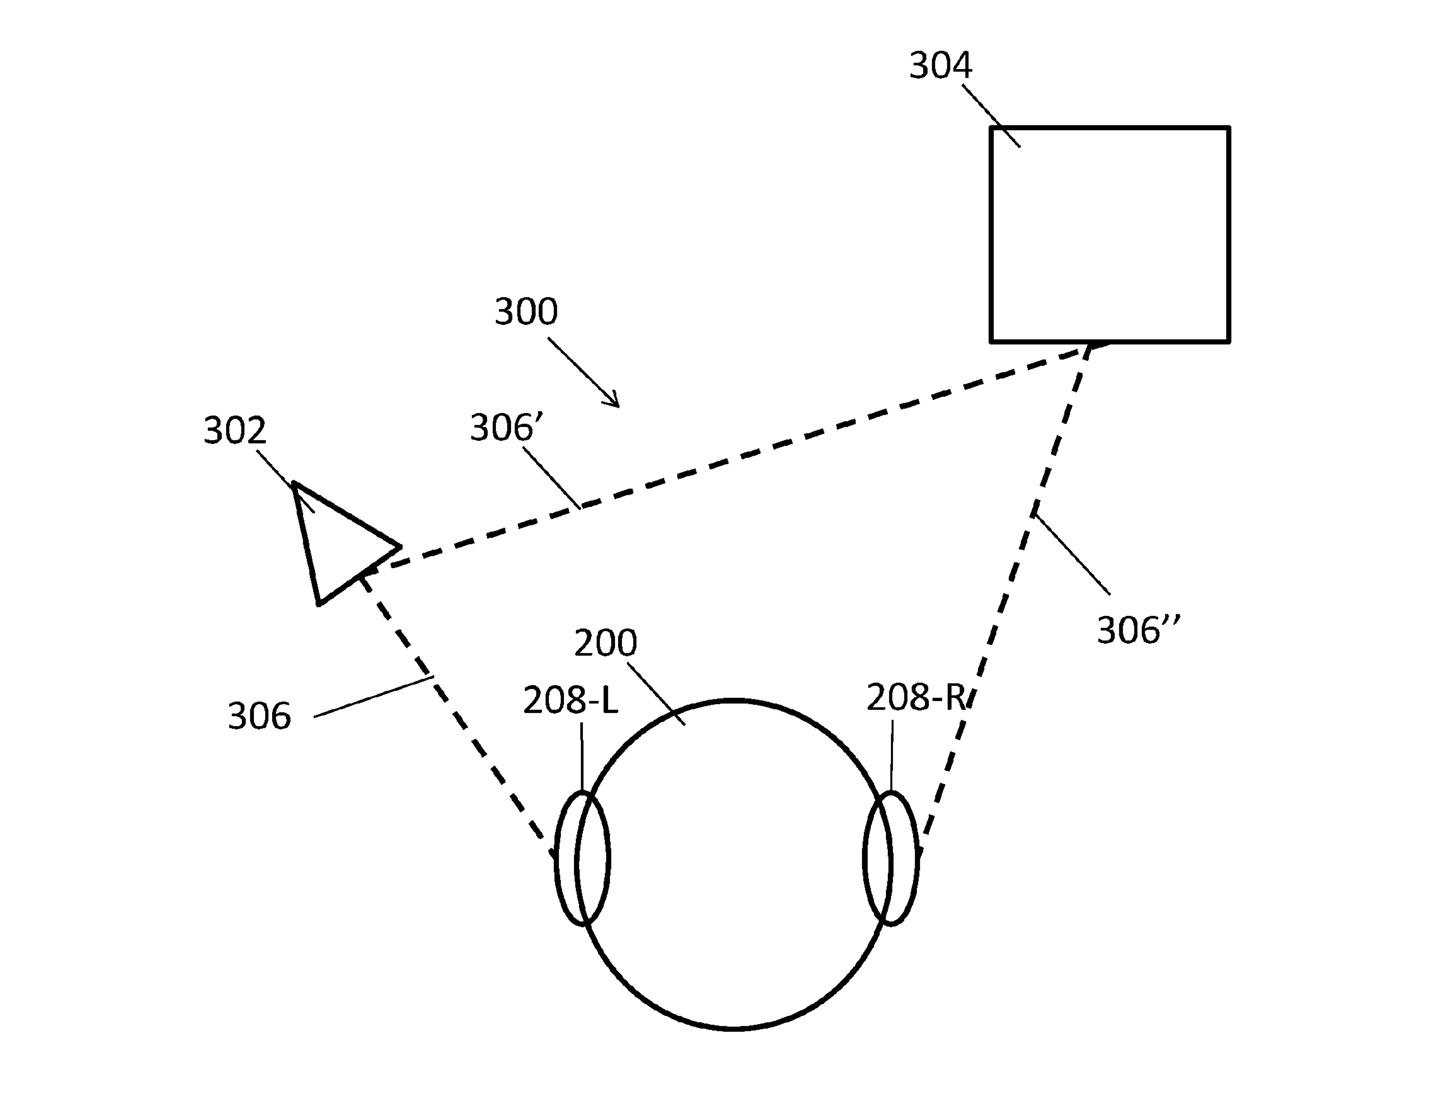 Magic Leap Patent Details Spatial Audio That Changes Based on Users' Head Movements